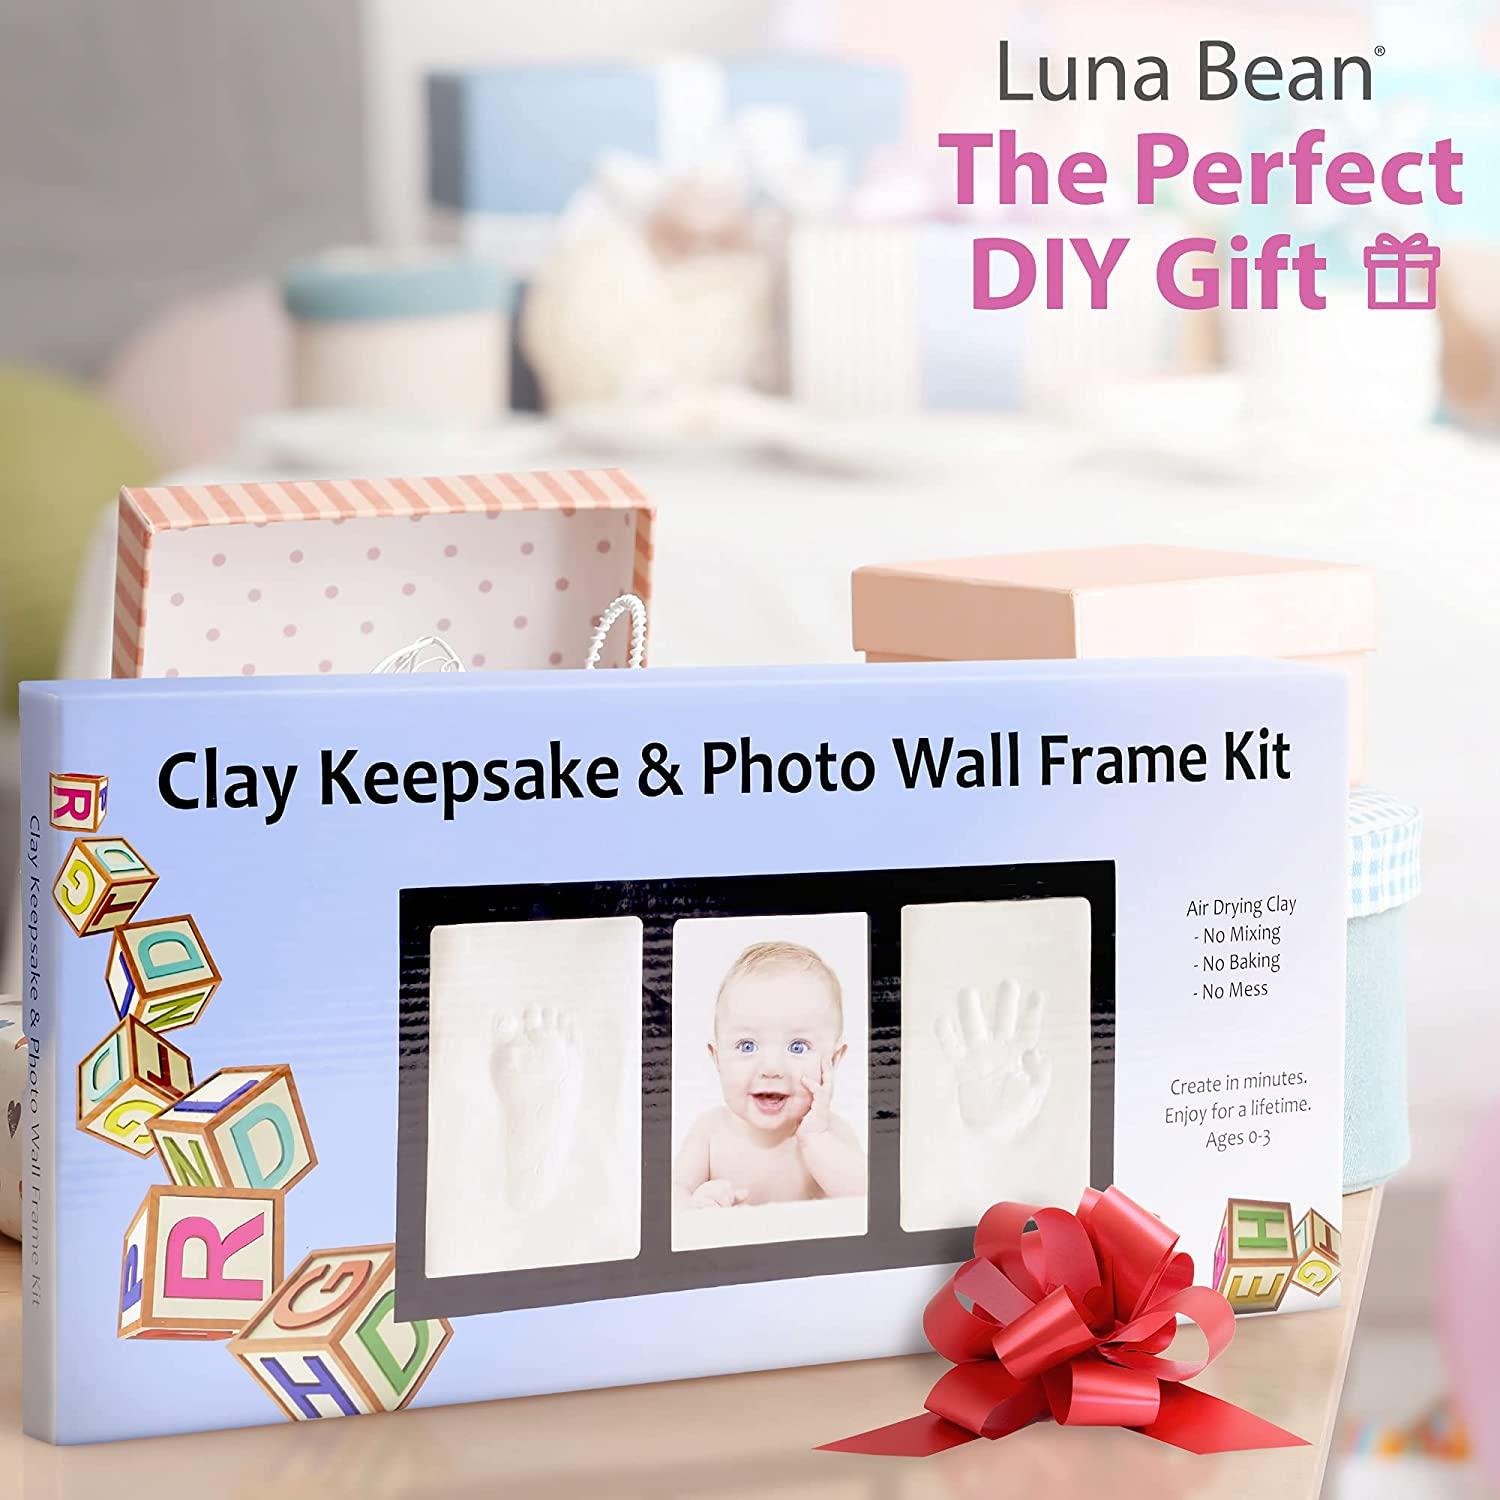 Clay Baby Hand and Footprint Kit with Photo Wall Mount Frame Kit - Inkless Baby  Footprint & Handprint Keepsake for Birthdays & Family Activities (Black  Frame) - Proud Baby by Luna Bean